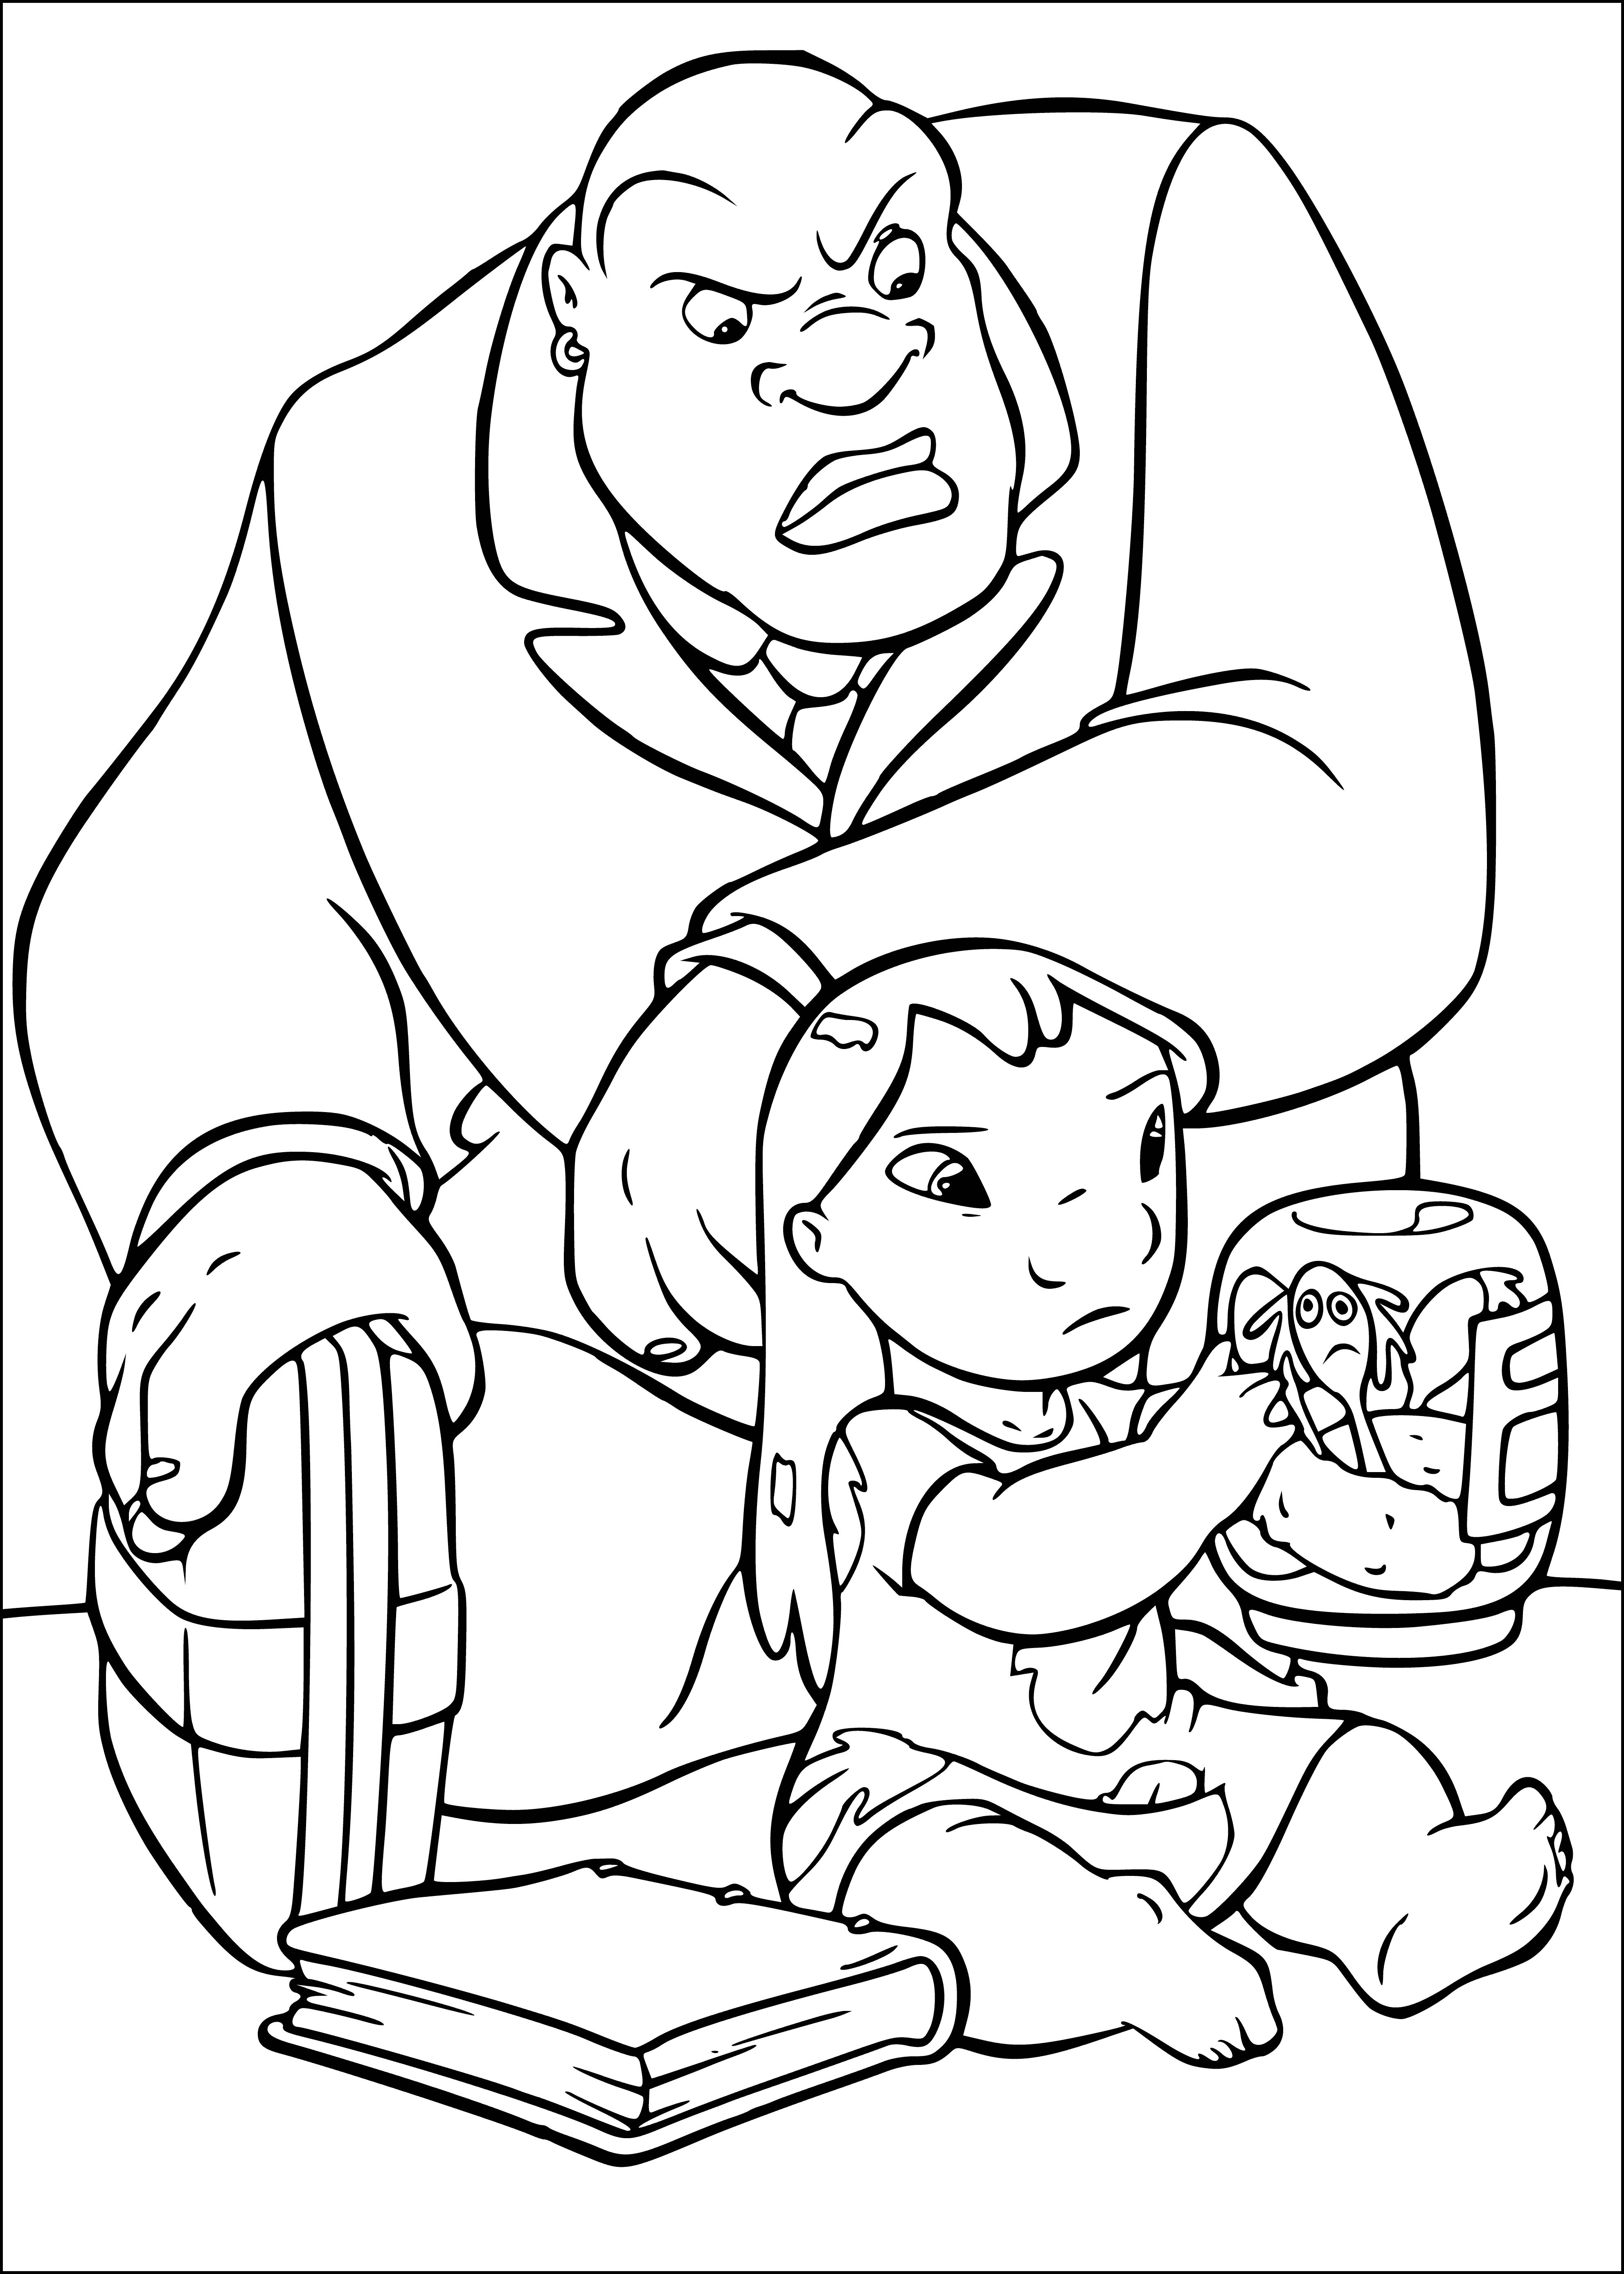 coloring page: Cobra and Lilo chat while looking contentedly at one another.